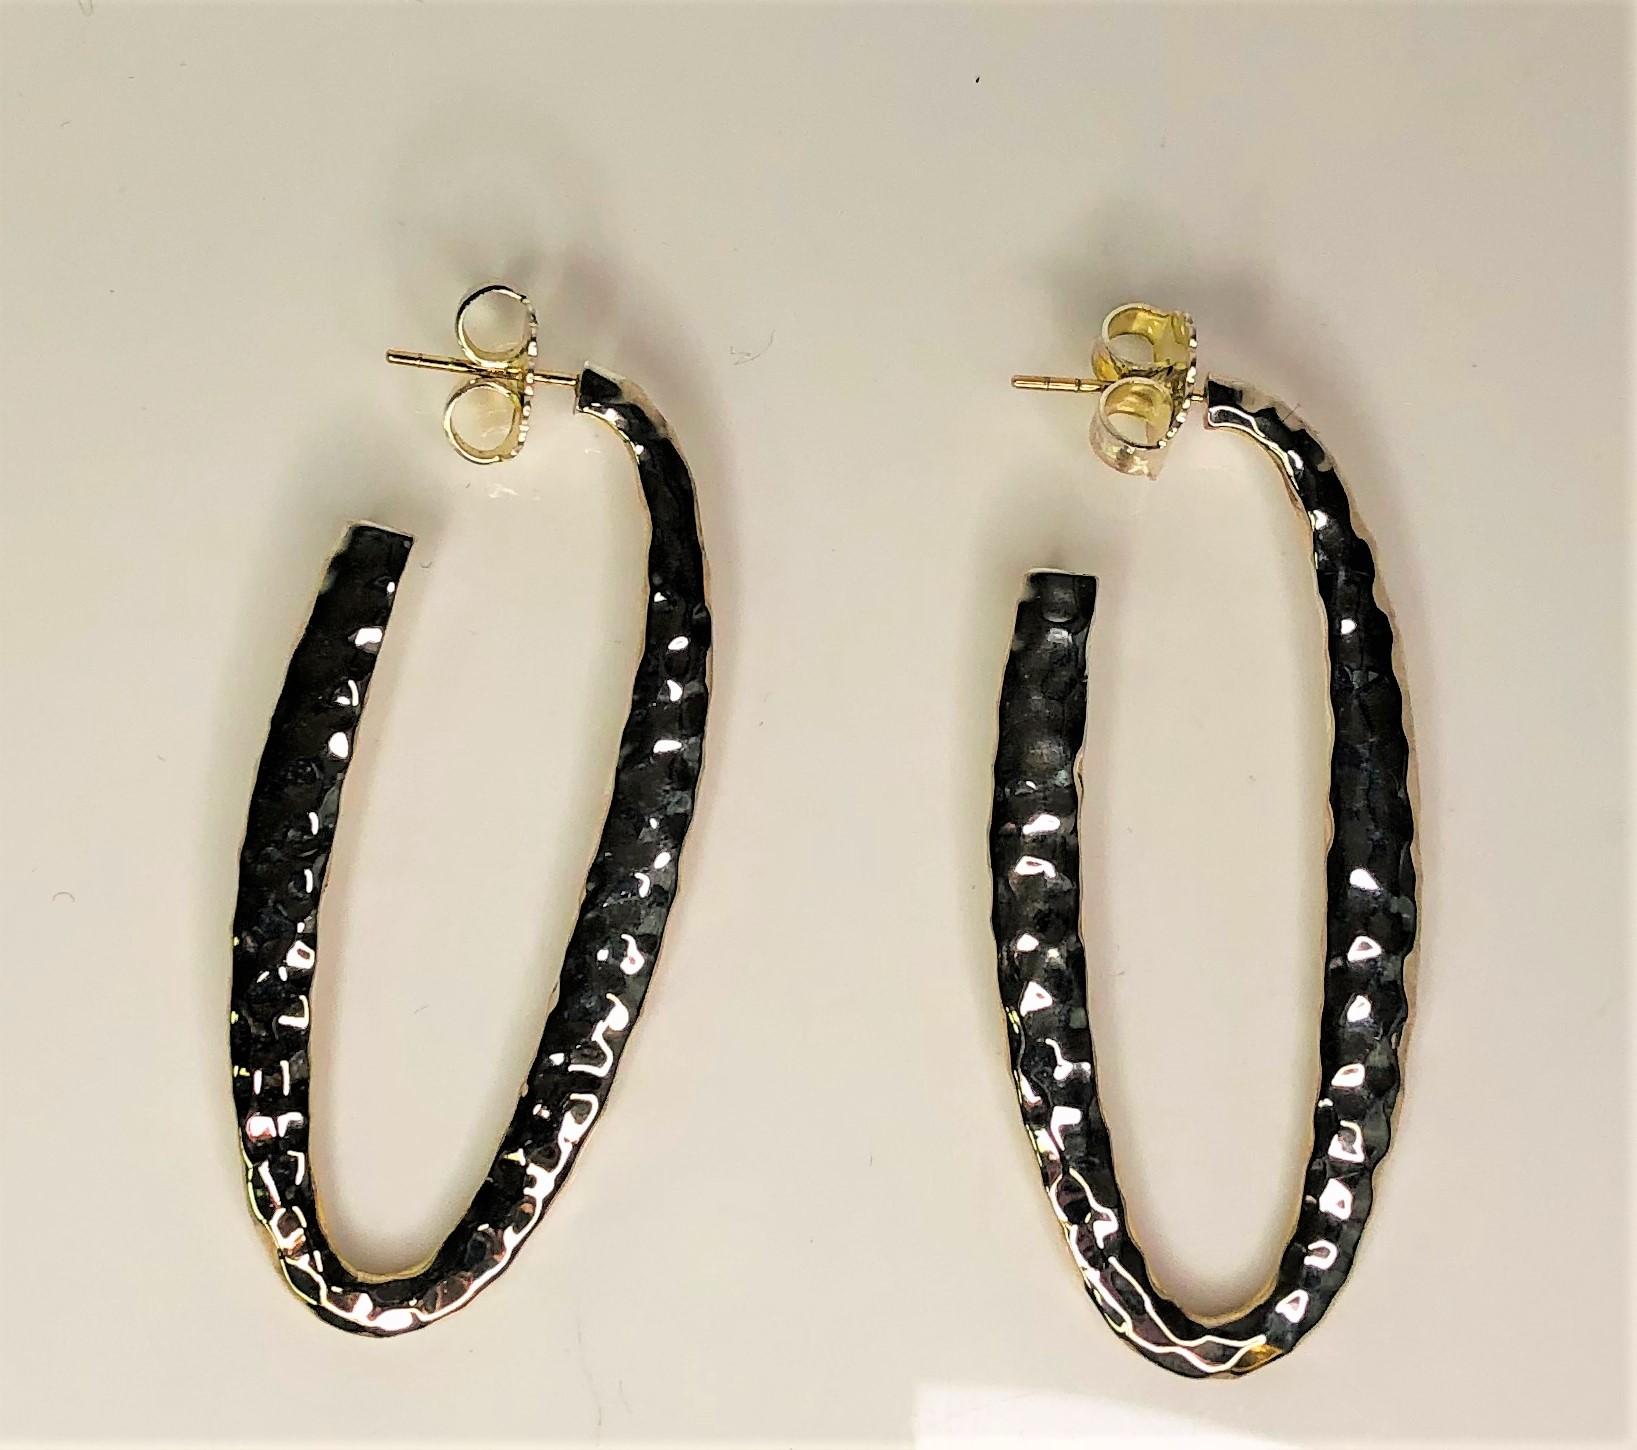 By Thistle & Bee, these elongated hammered hoop earrings will be a favorite!
Sterling Silver, hammered, with 14K gold posts
Approximately 2 1/16 inches long x 7/8 inch wide and 1/16 inch thick
Post with friction back
Stamped 